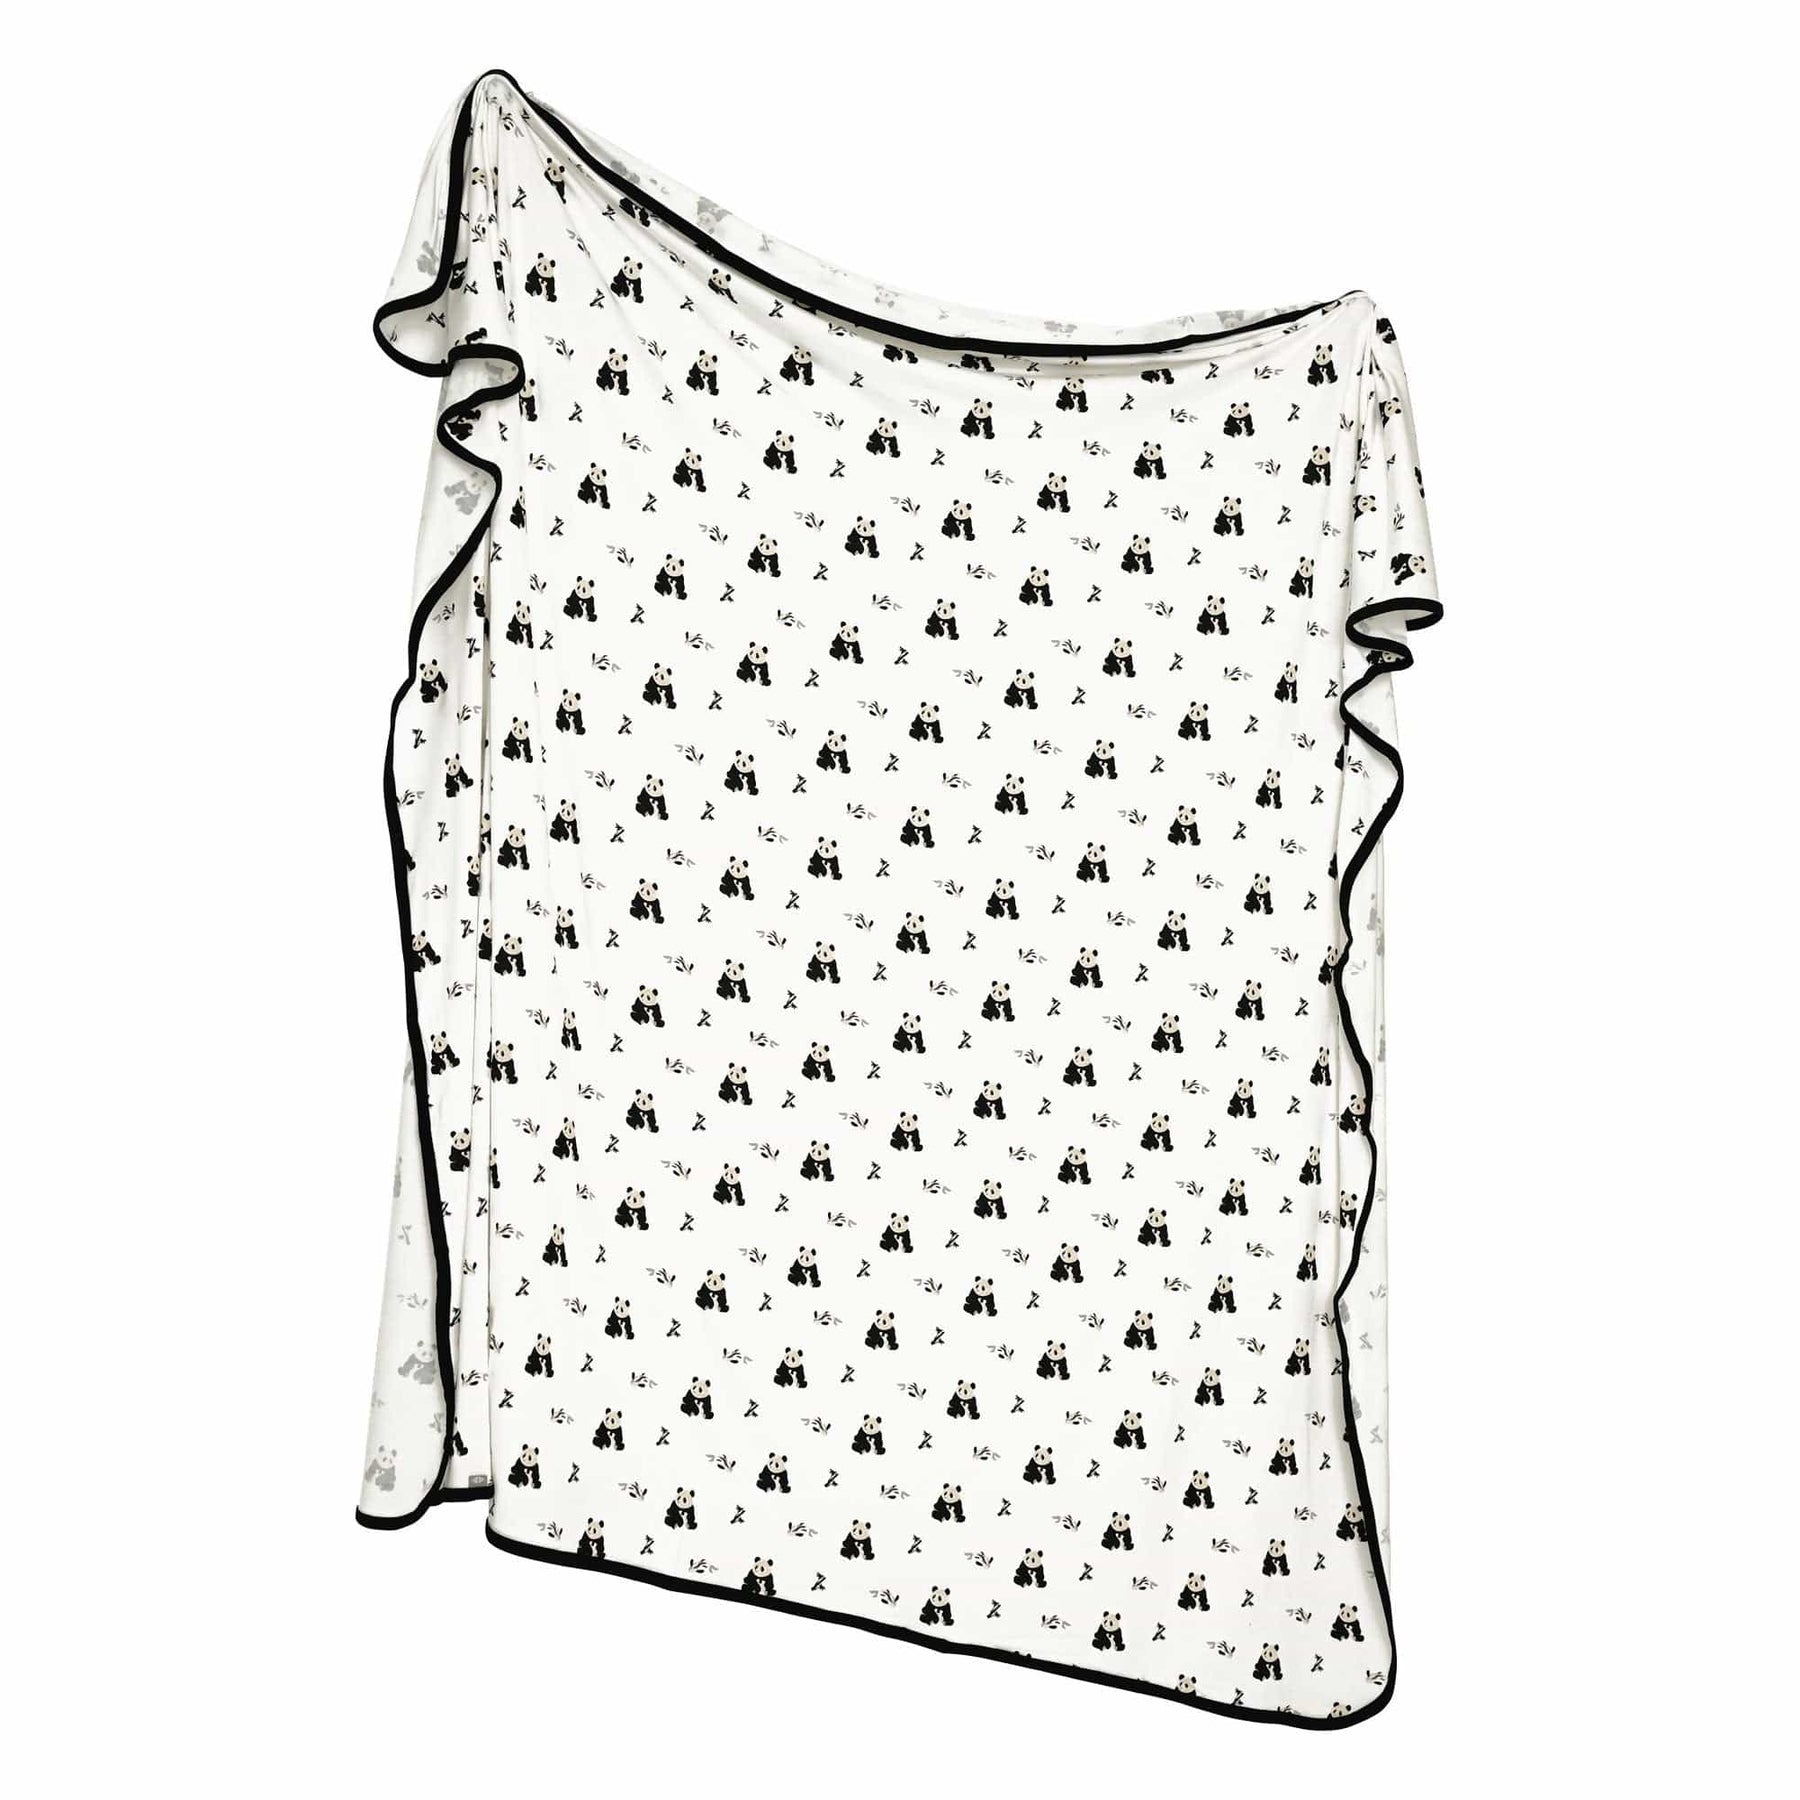 Kyte BABY Swaddle Blanket in Black and White Zen